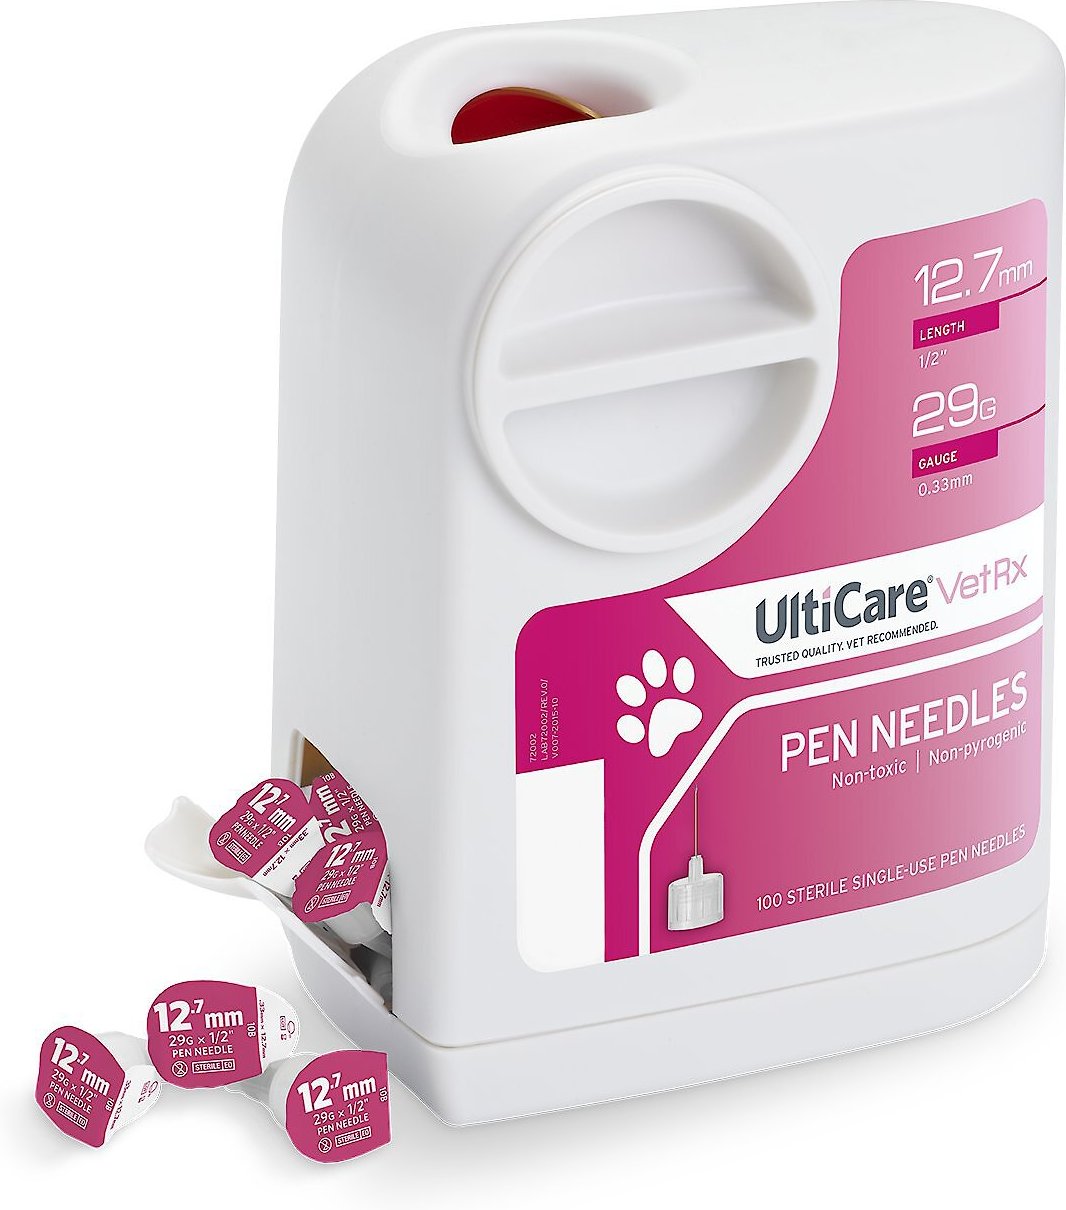 ULTICARE VETRX UltiGuard SafePack Pen Needles and Sharps Container